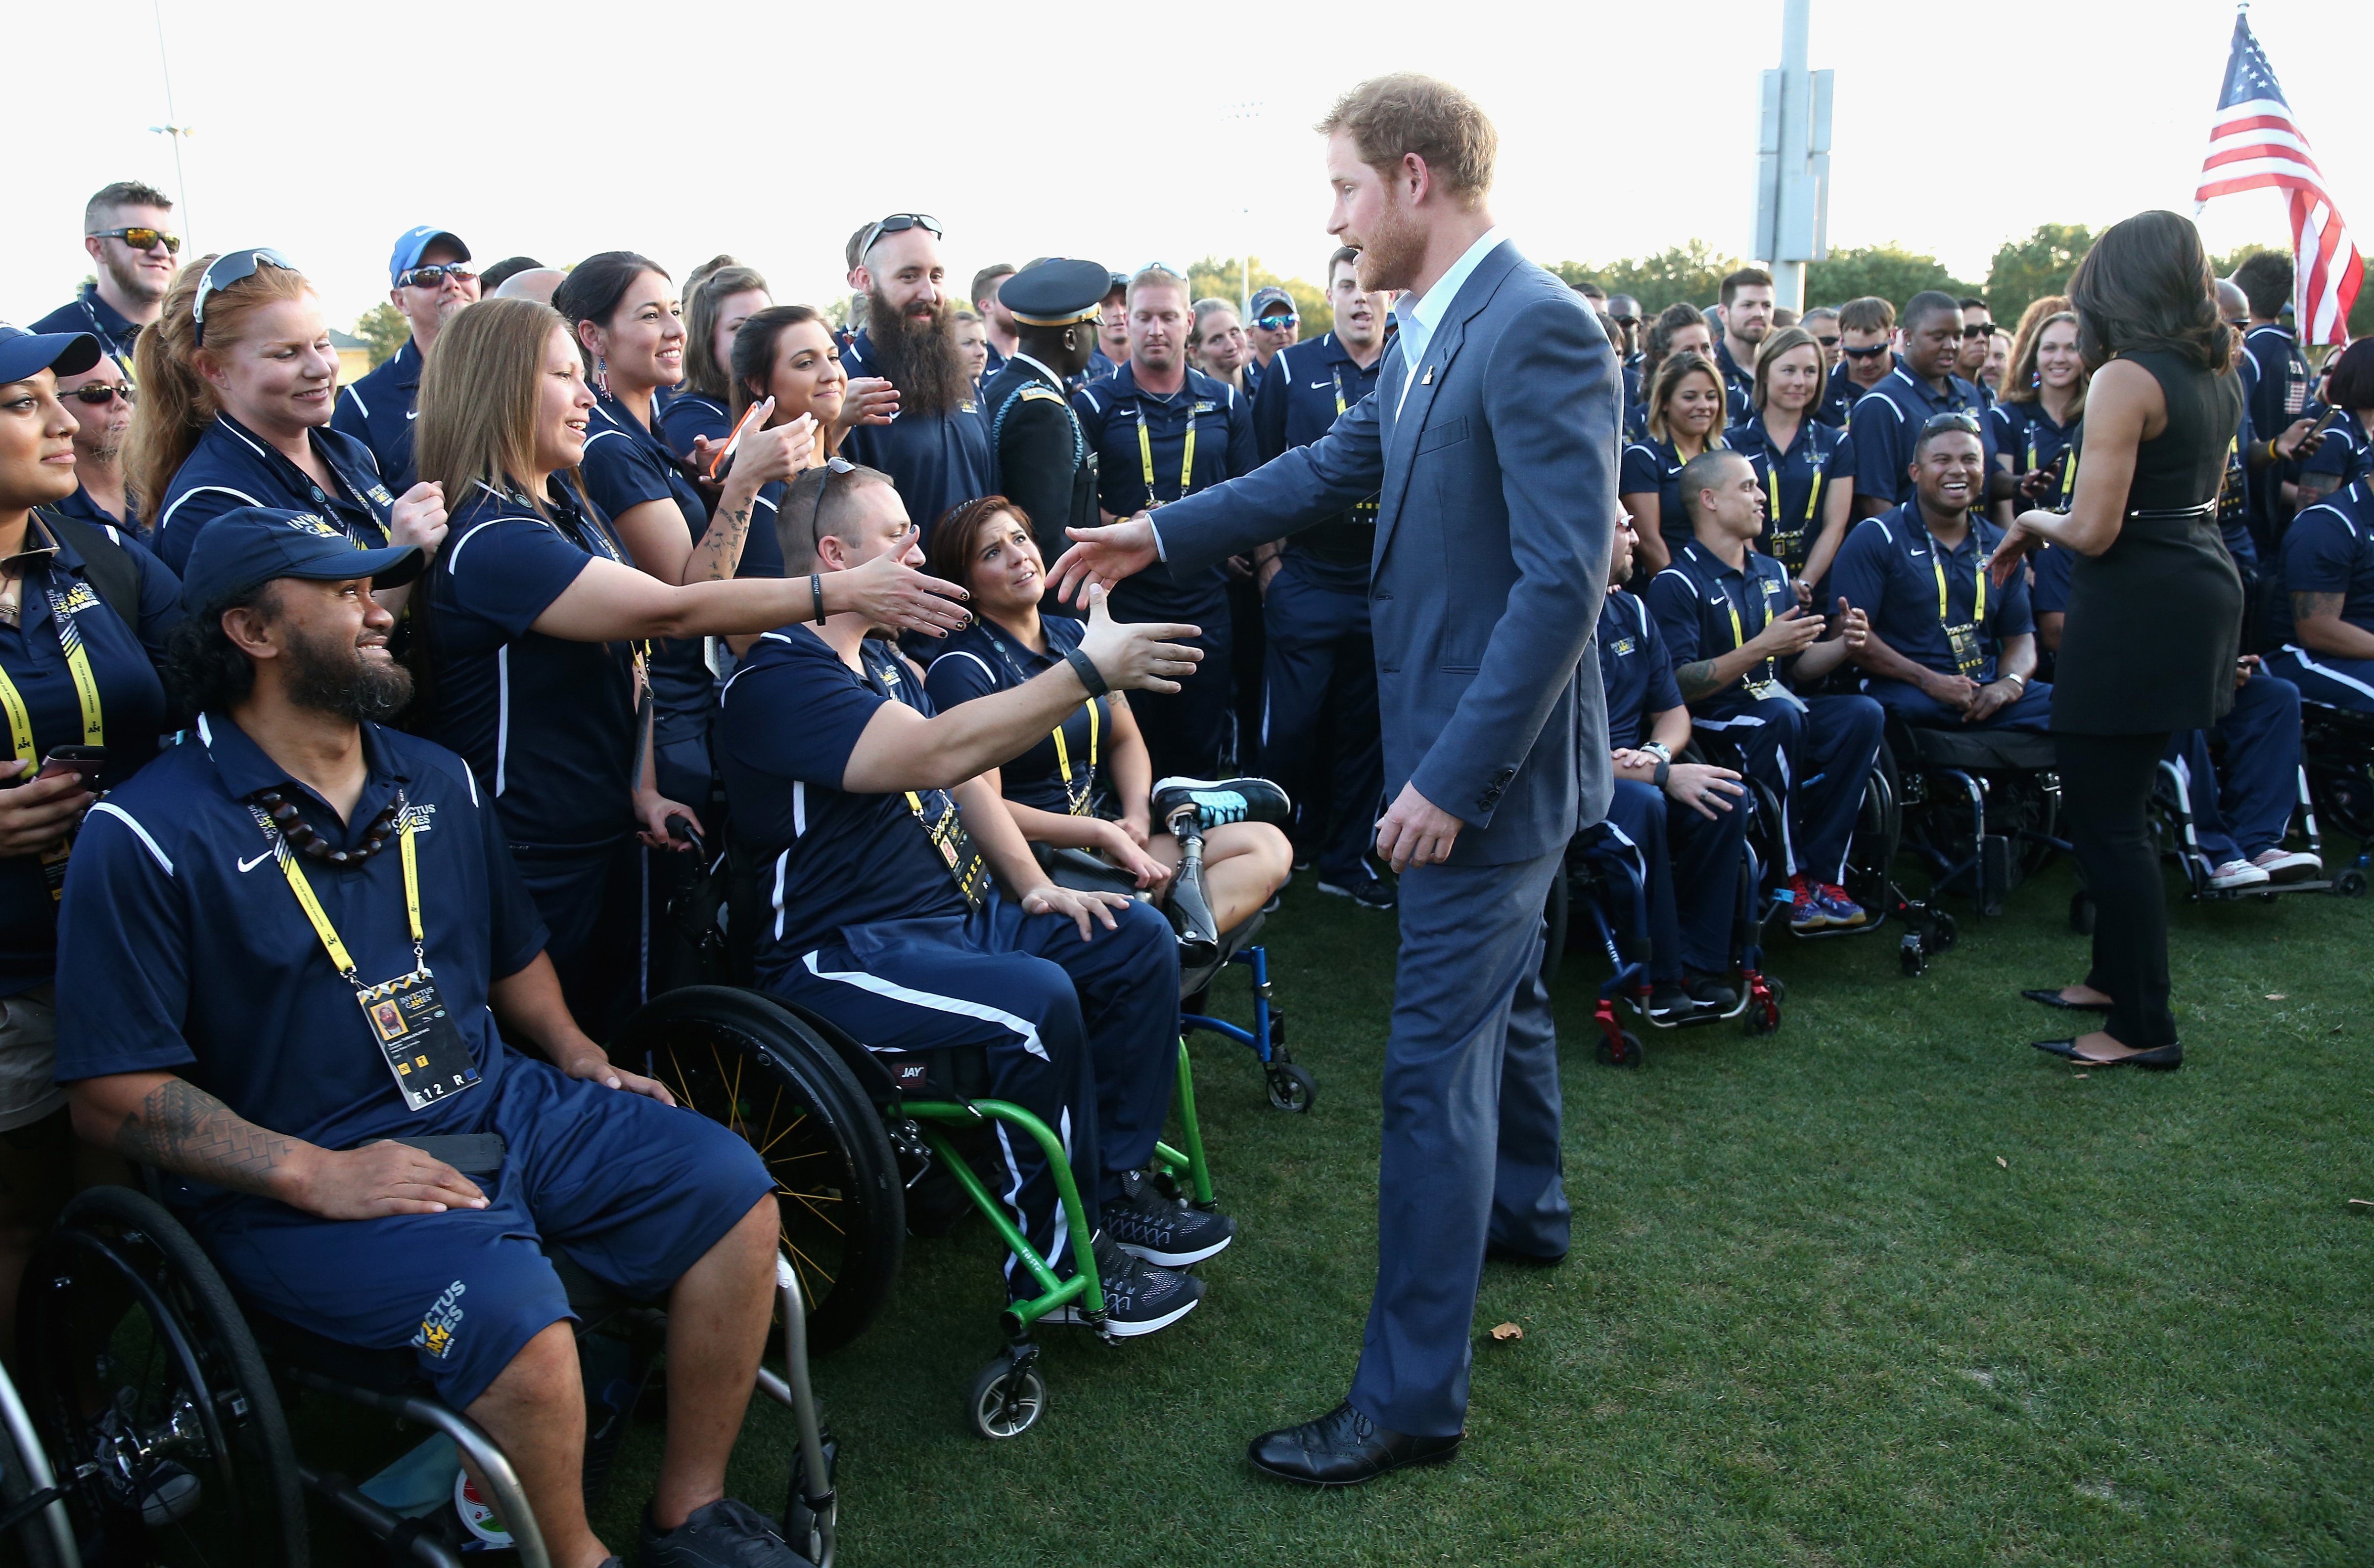 Prince Harry meets the USA Invictus Team ahead of the Opening Ceremony of the Invictus Games on May 8, 2016 in Orlando, Florida. (Chris Jackson—Getty Images for Invictus)